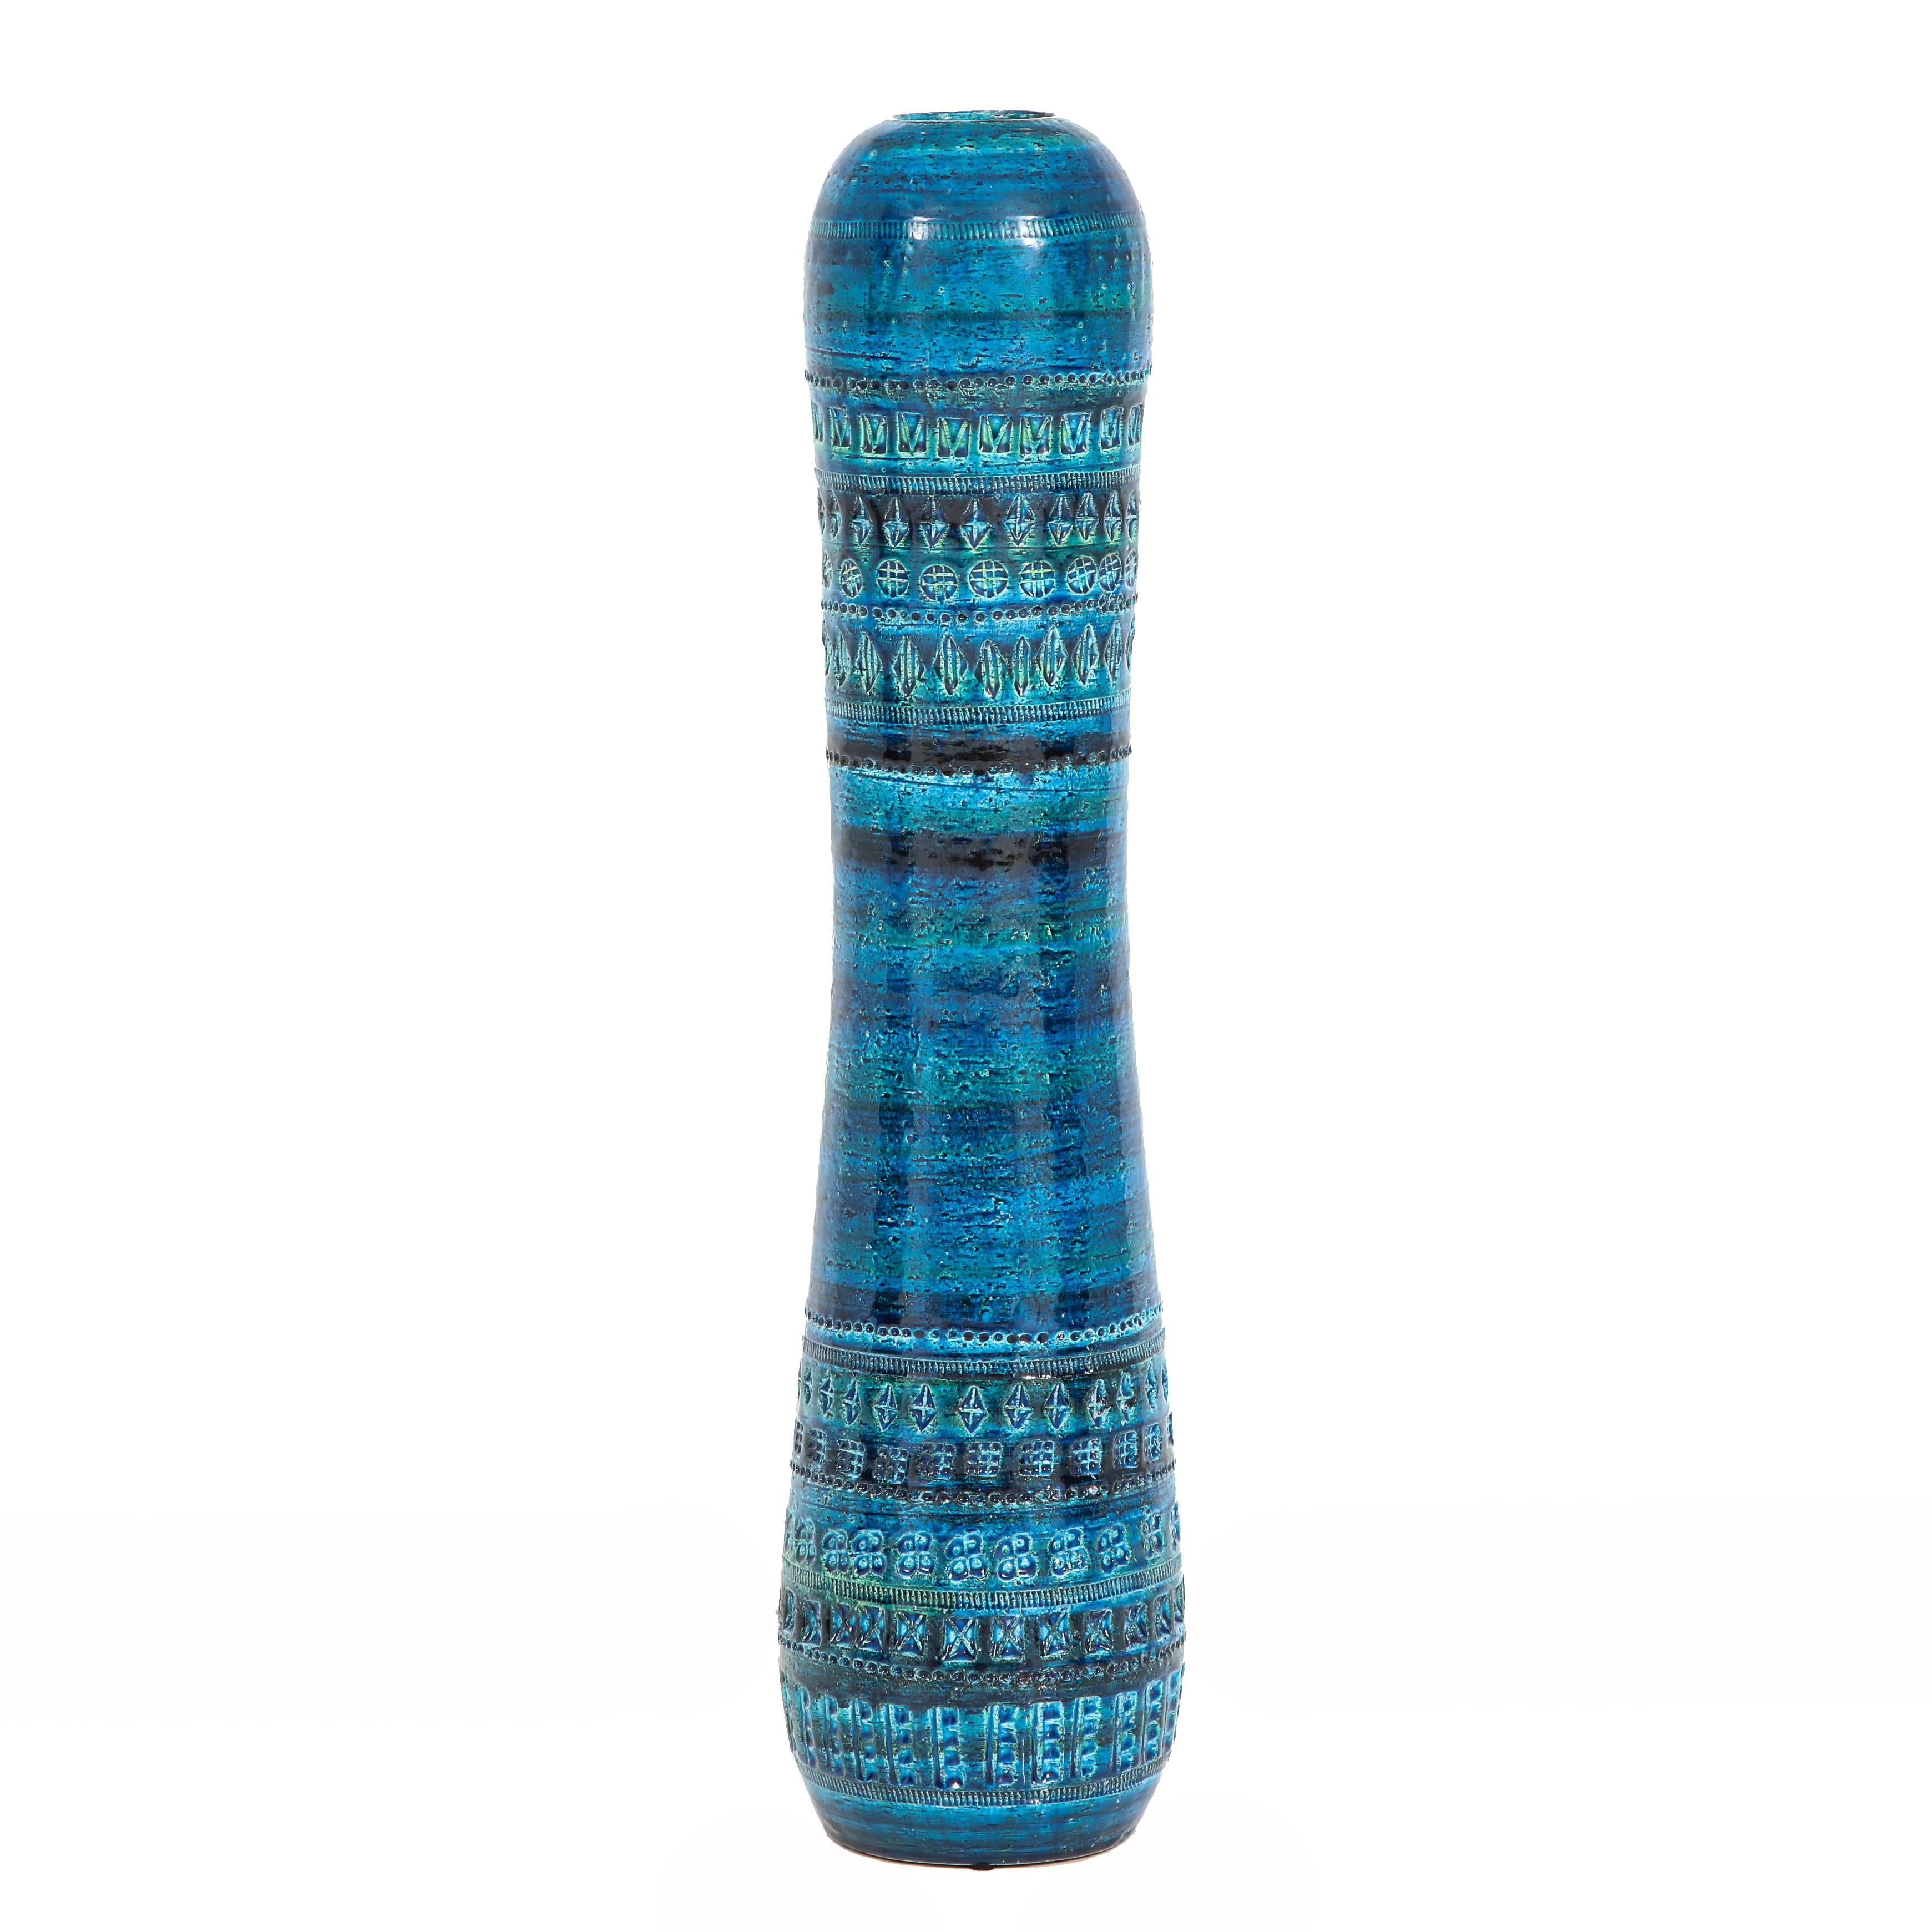 Aldo Londi Bitossi ceramic vase rimini blue signed, Italy, 1960s. Because of its large-scale (29 inches tall) this was more than likely an exhibition piece. Rimini blue glaze with bands of impressed geometric patterns. Rare and unusual. Signed V